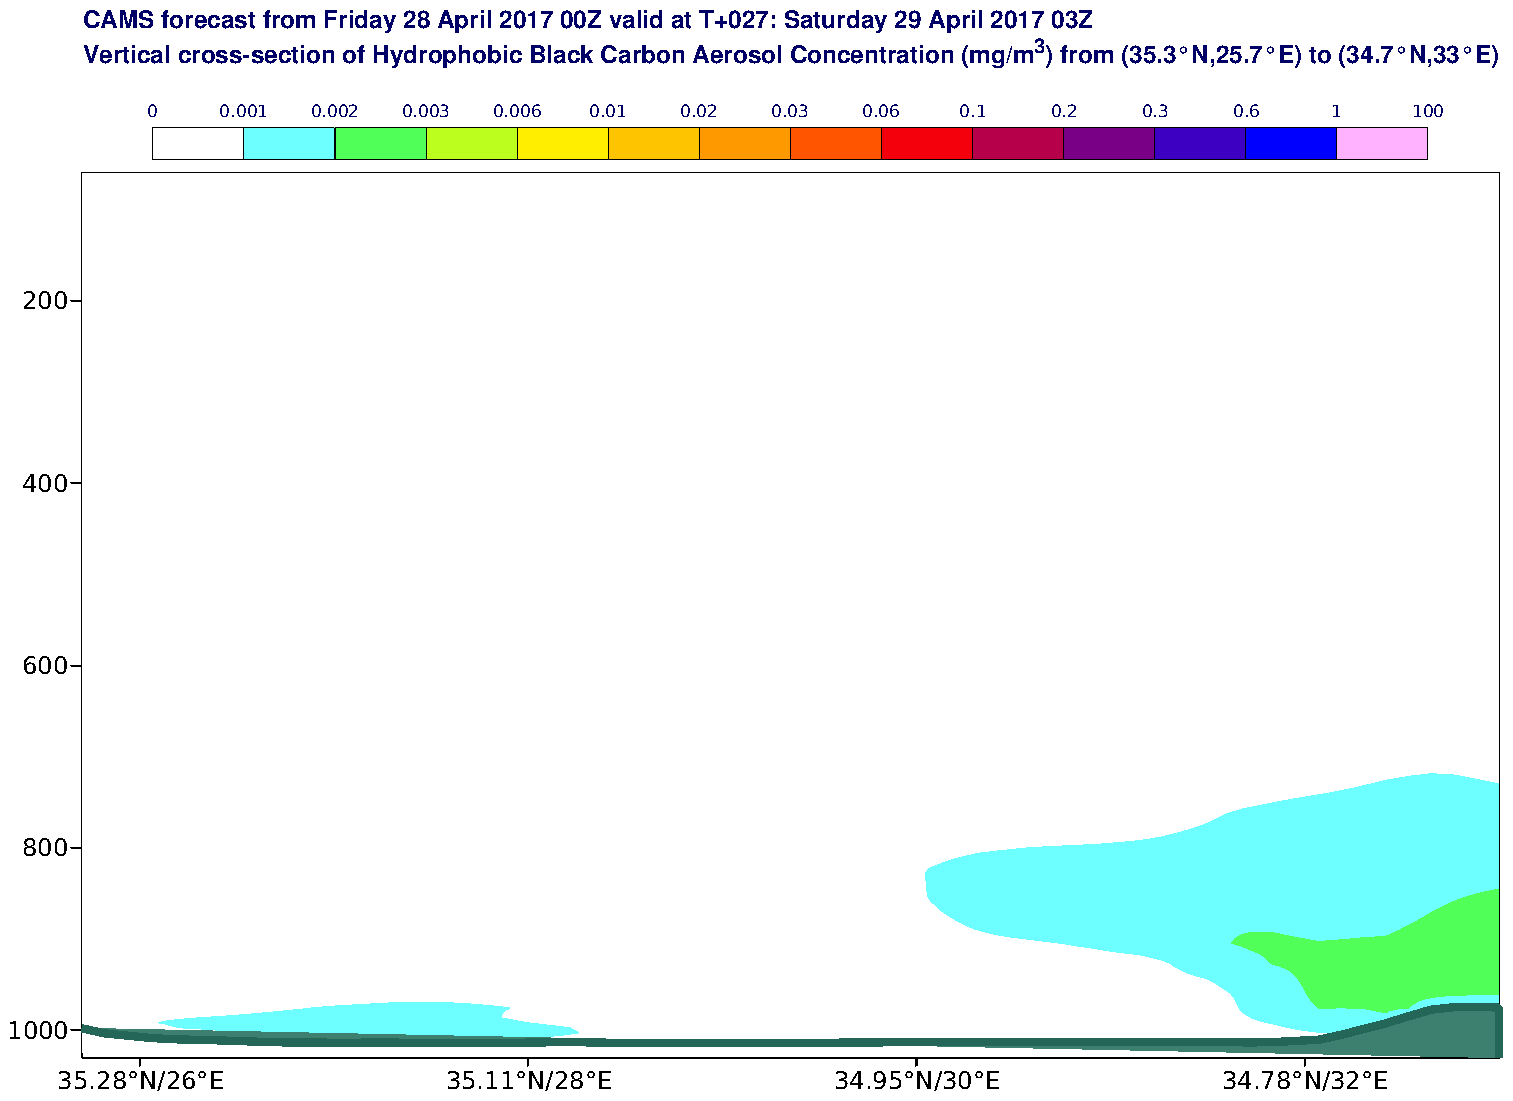 Vertical cross-section of Hydrophobic Black Carbon Aerosol Concentration (mg/m3) valid at T27 - 2017-04-29 03:00